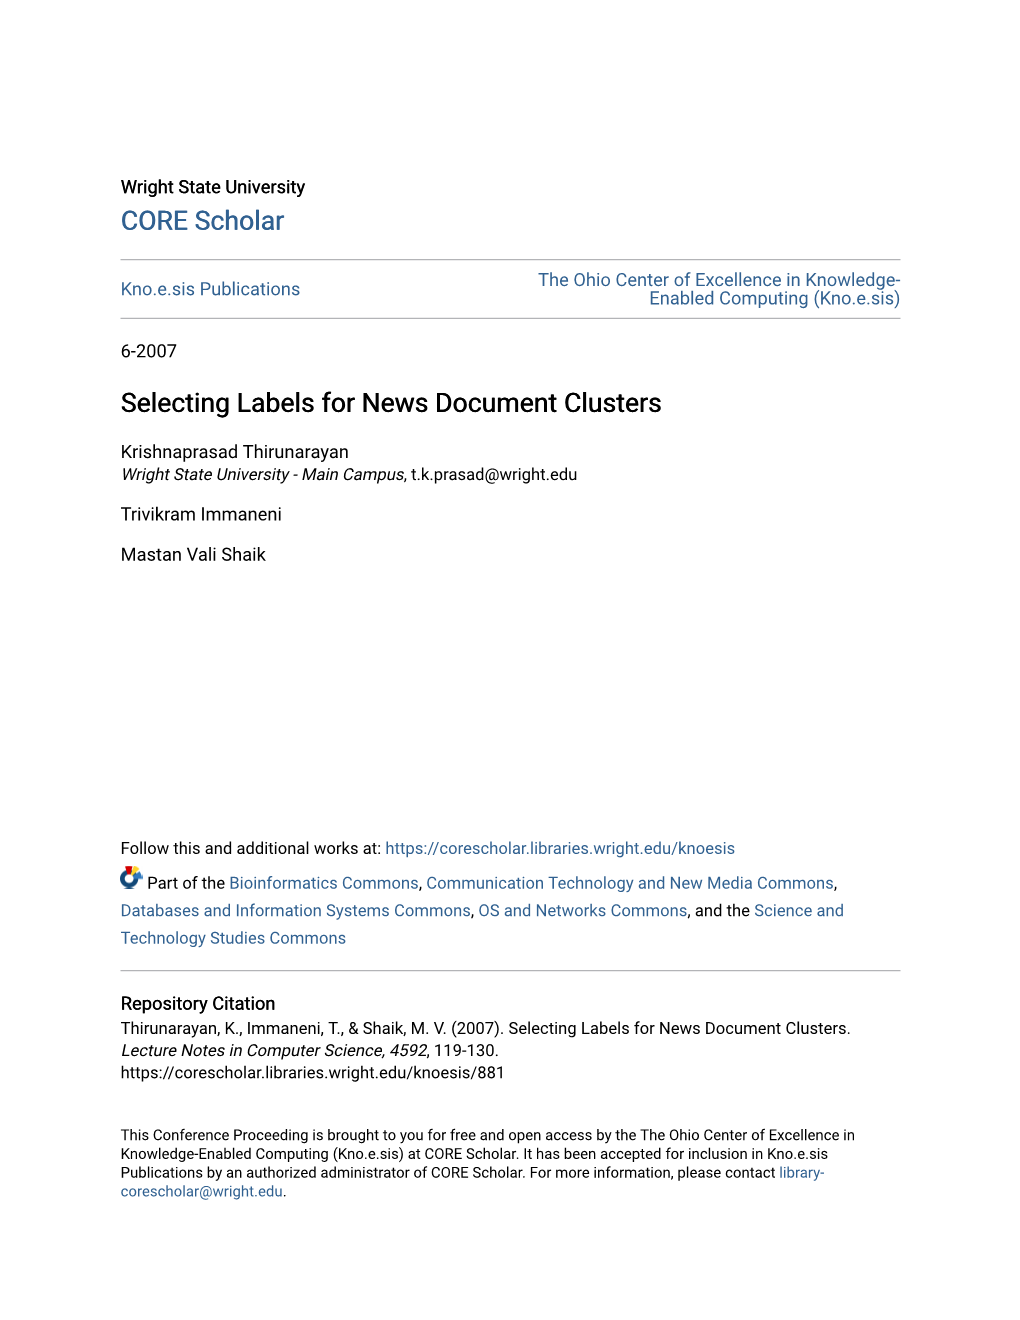 Selecting Labels for News Document Clusters